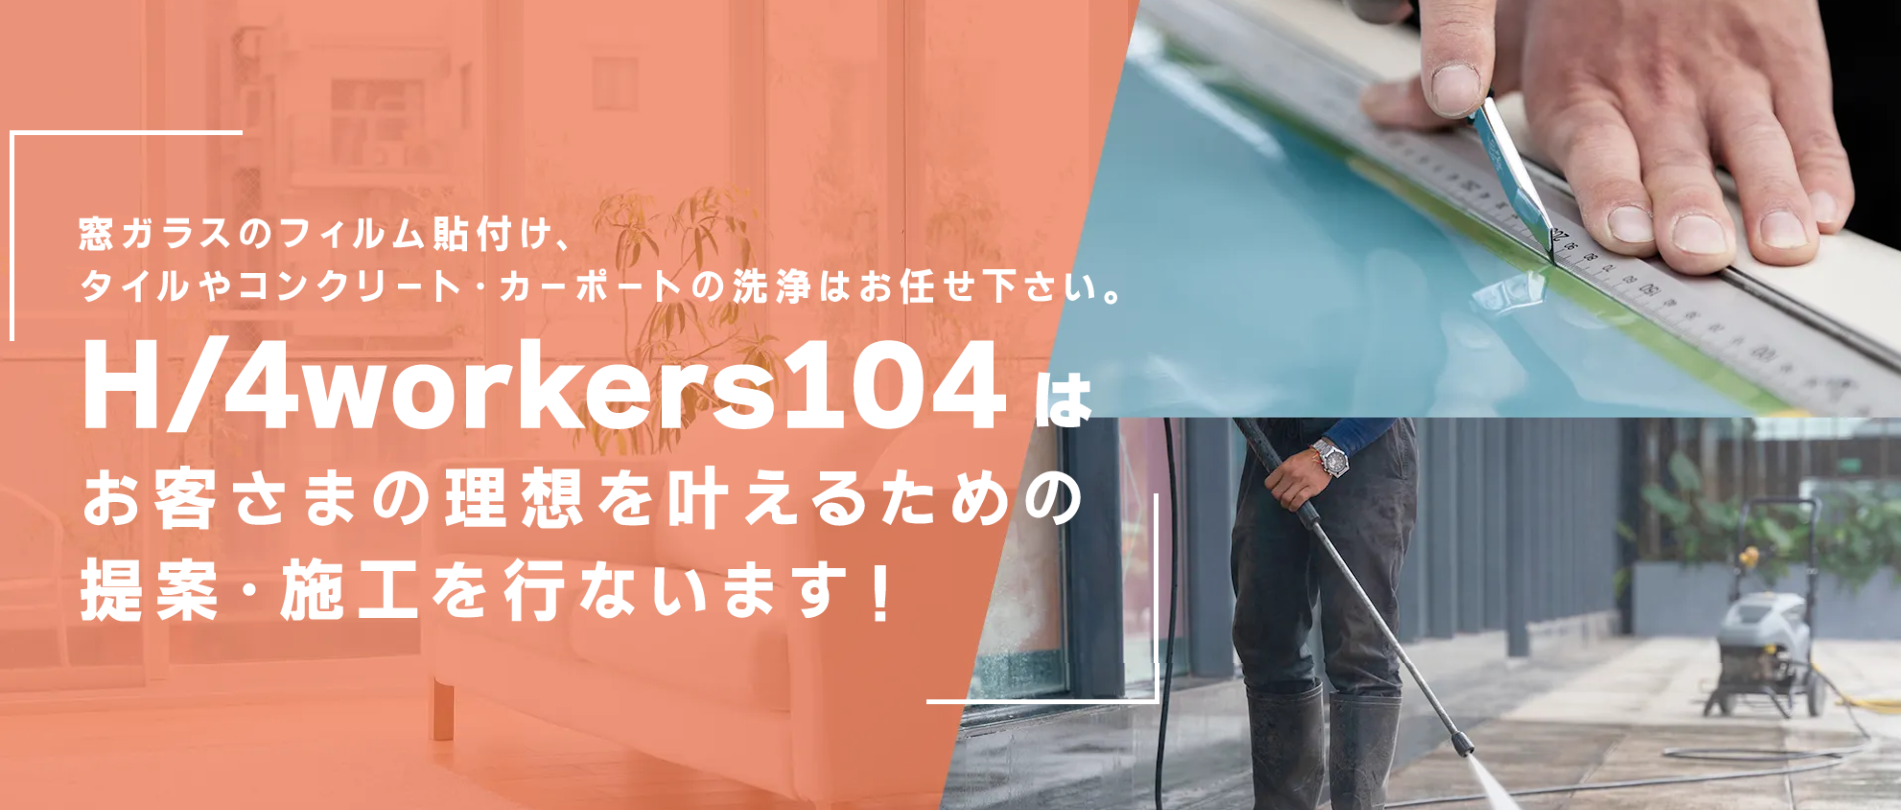 H/4workers104メイン画像